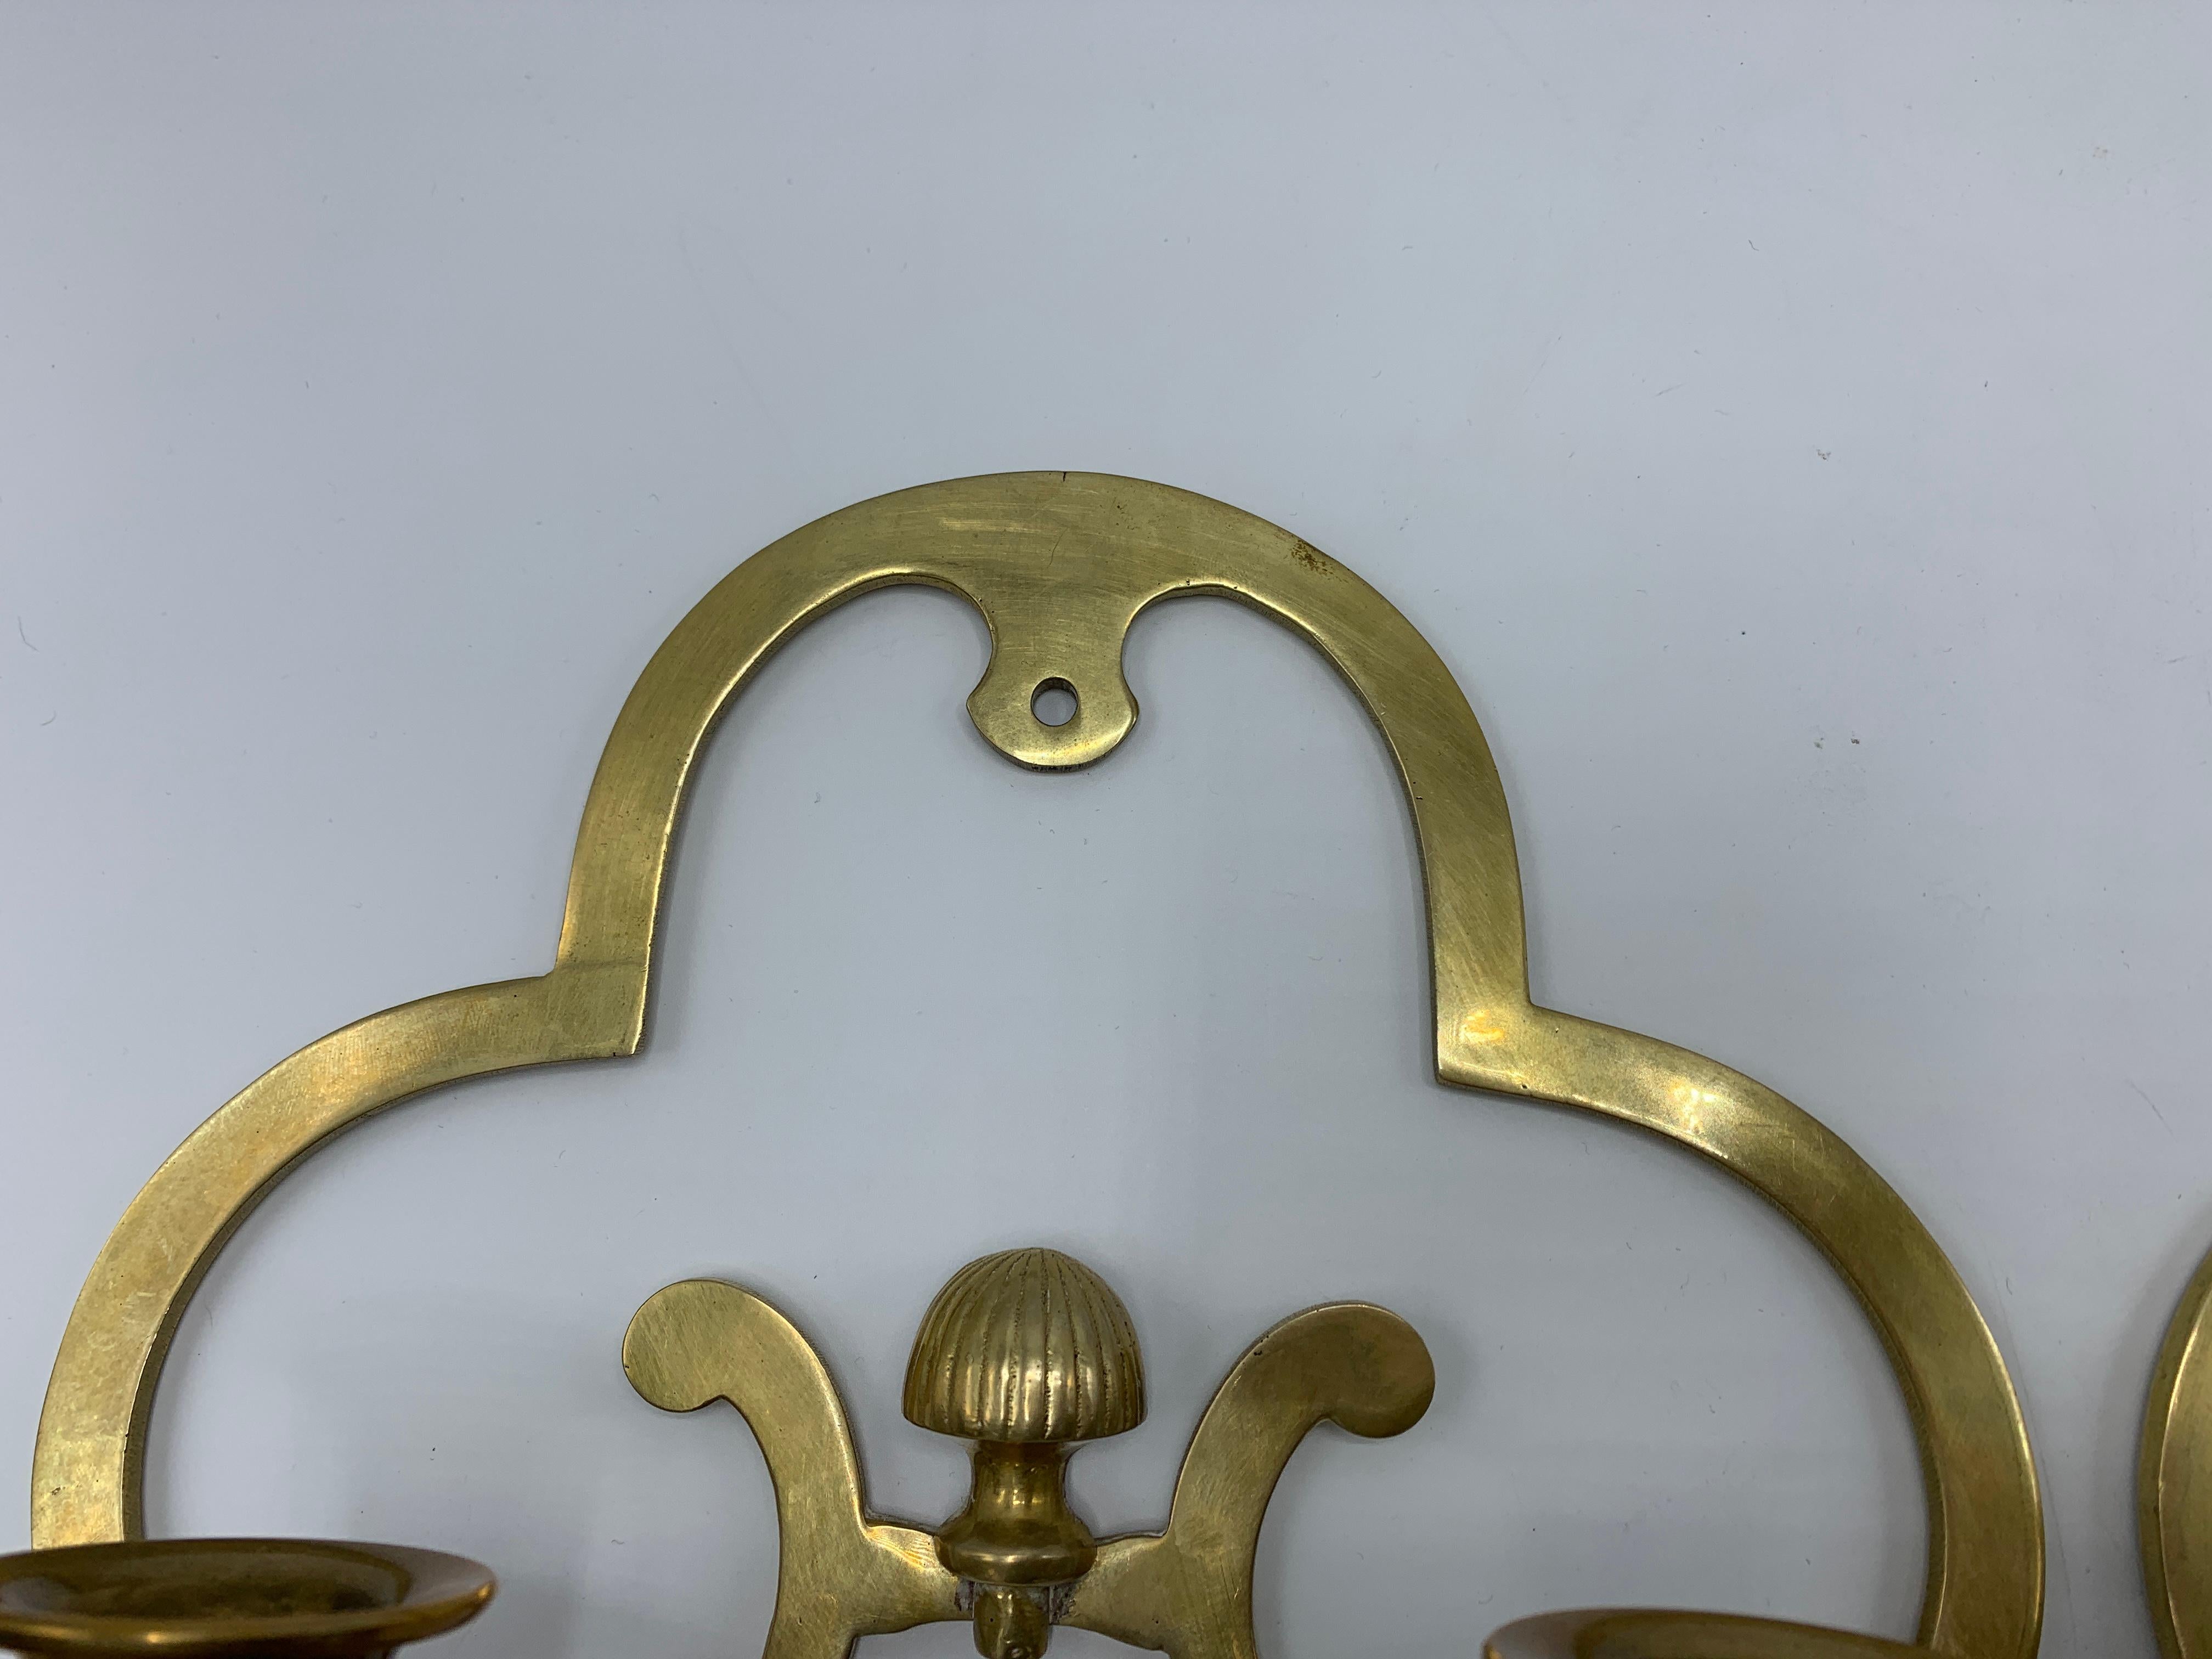 Offered is a fabulous, pair of 1970s brass candlestick wall sconces. The pair vaguely resembles the shape of a clover, with more modern curves. Hangs by nail or screw, along center.